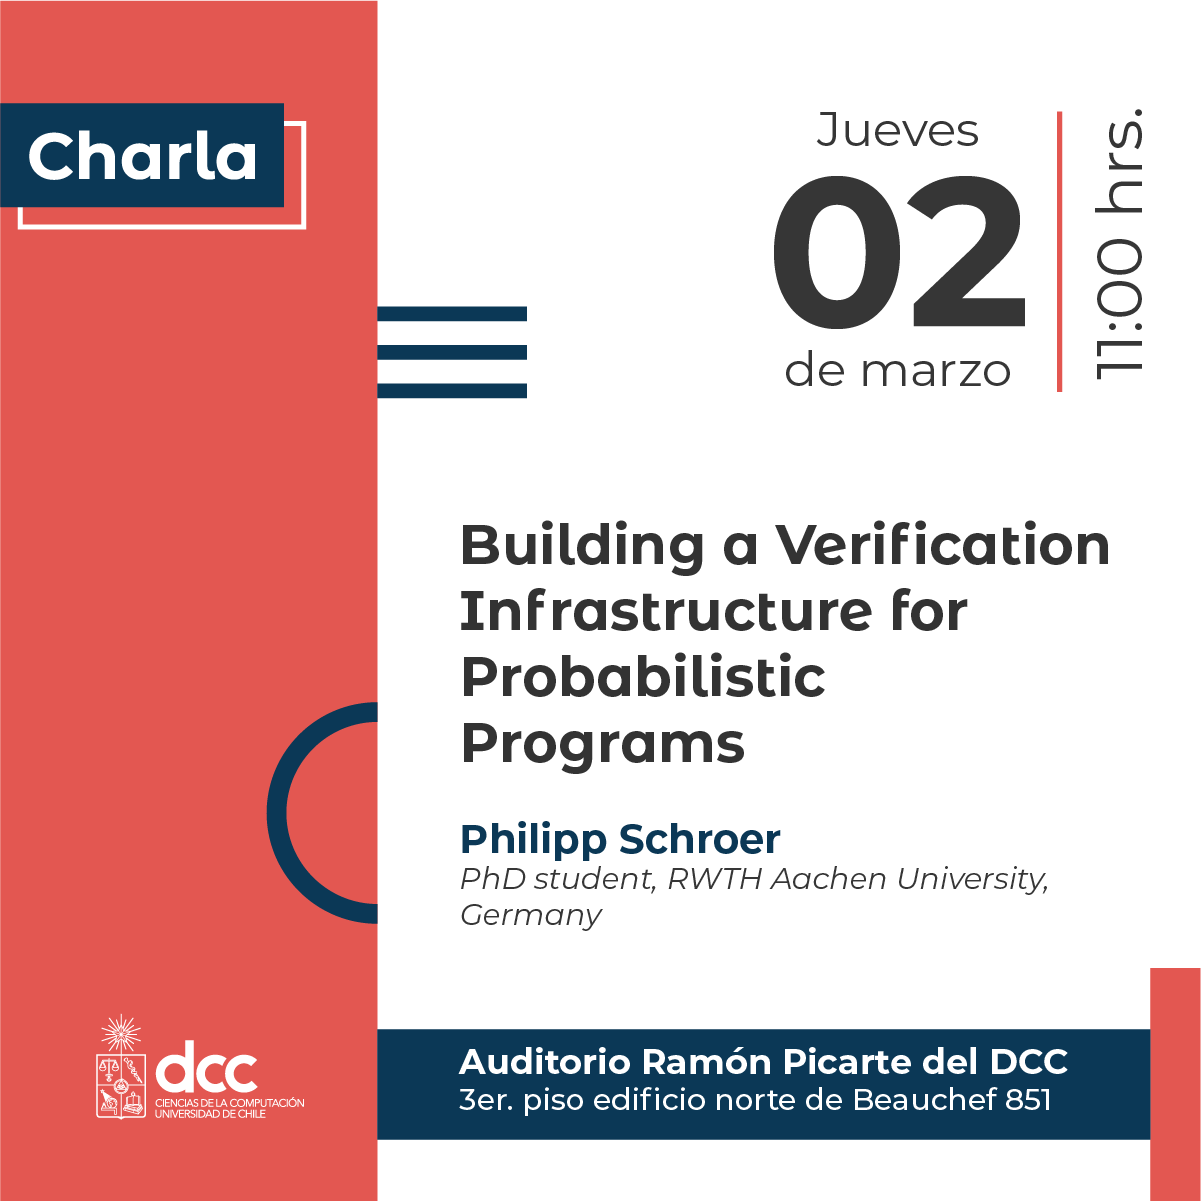 Charla: "Building a Verification Infrastructure for Probabilistic Programs"